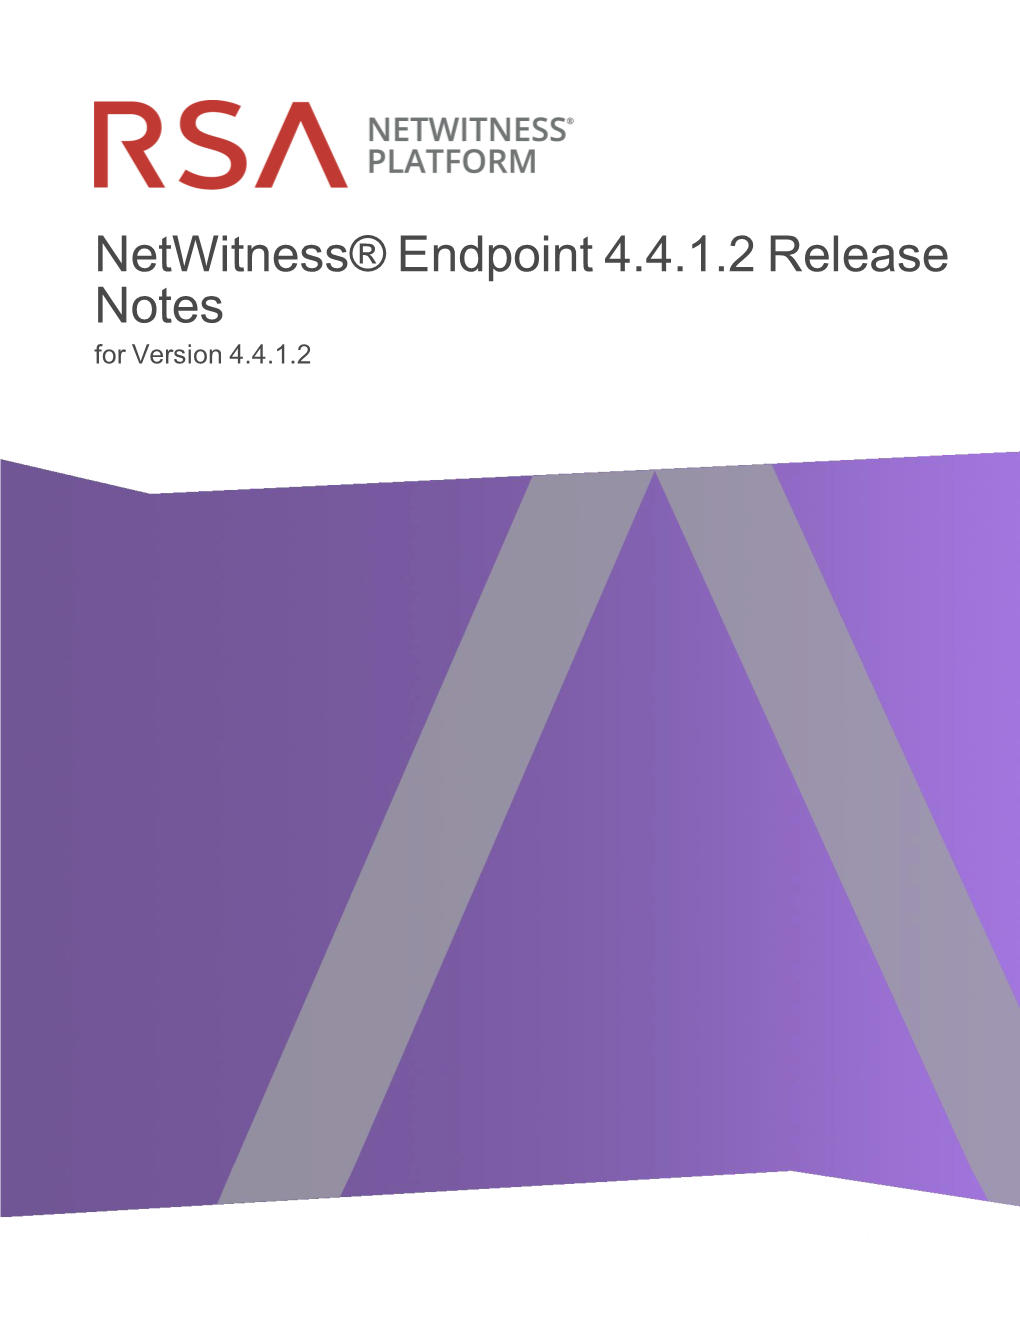 RSA Netwitness Endpoint 4.4.1.2 Release Notes